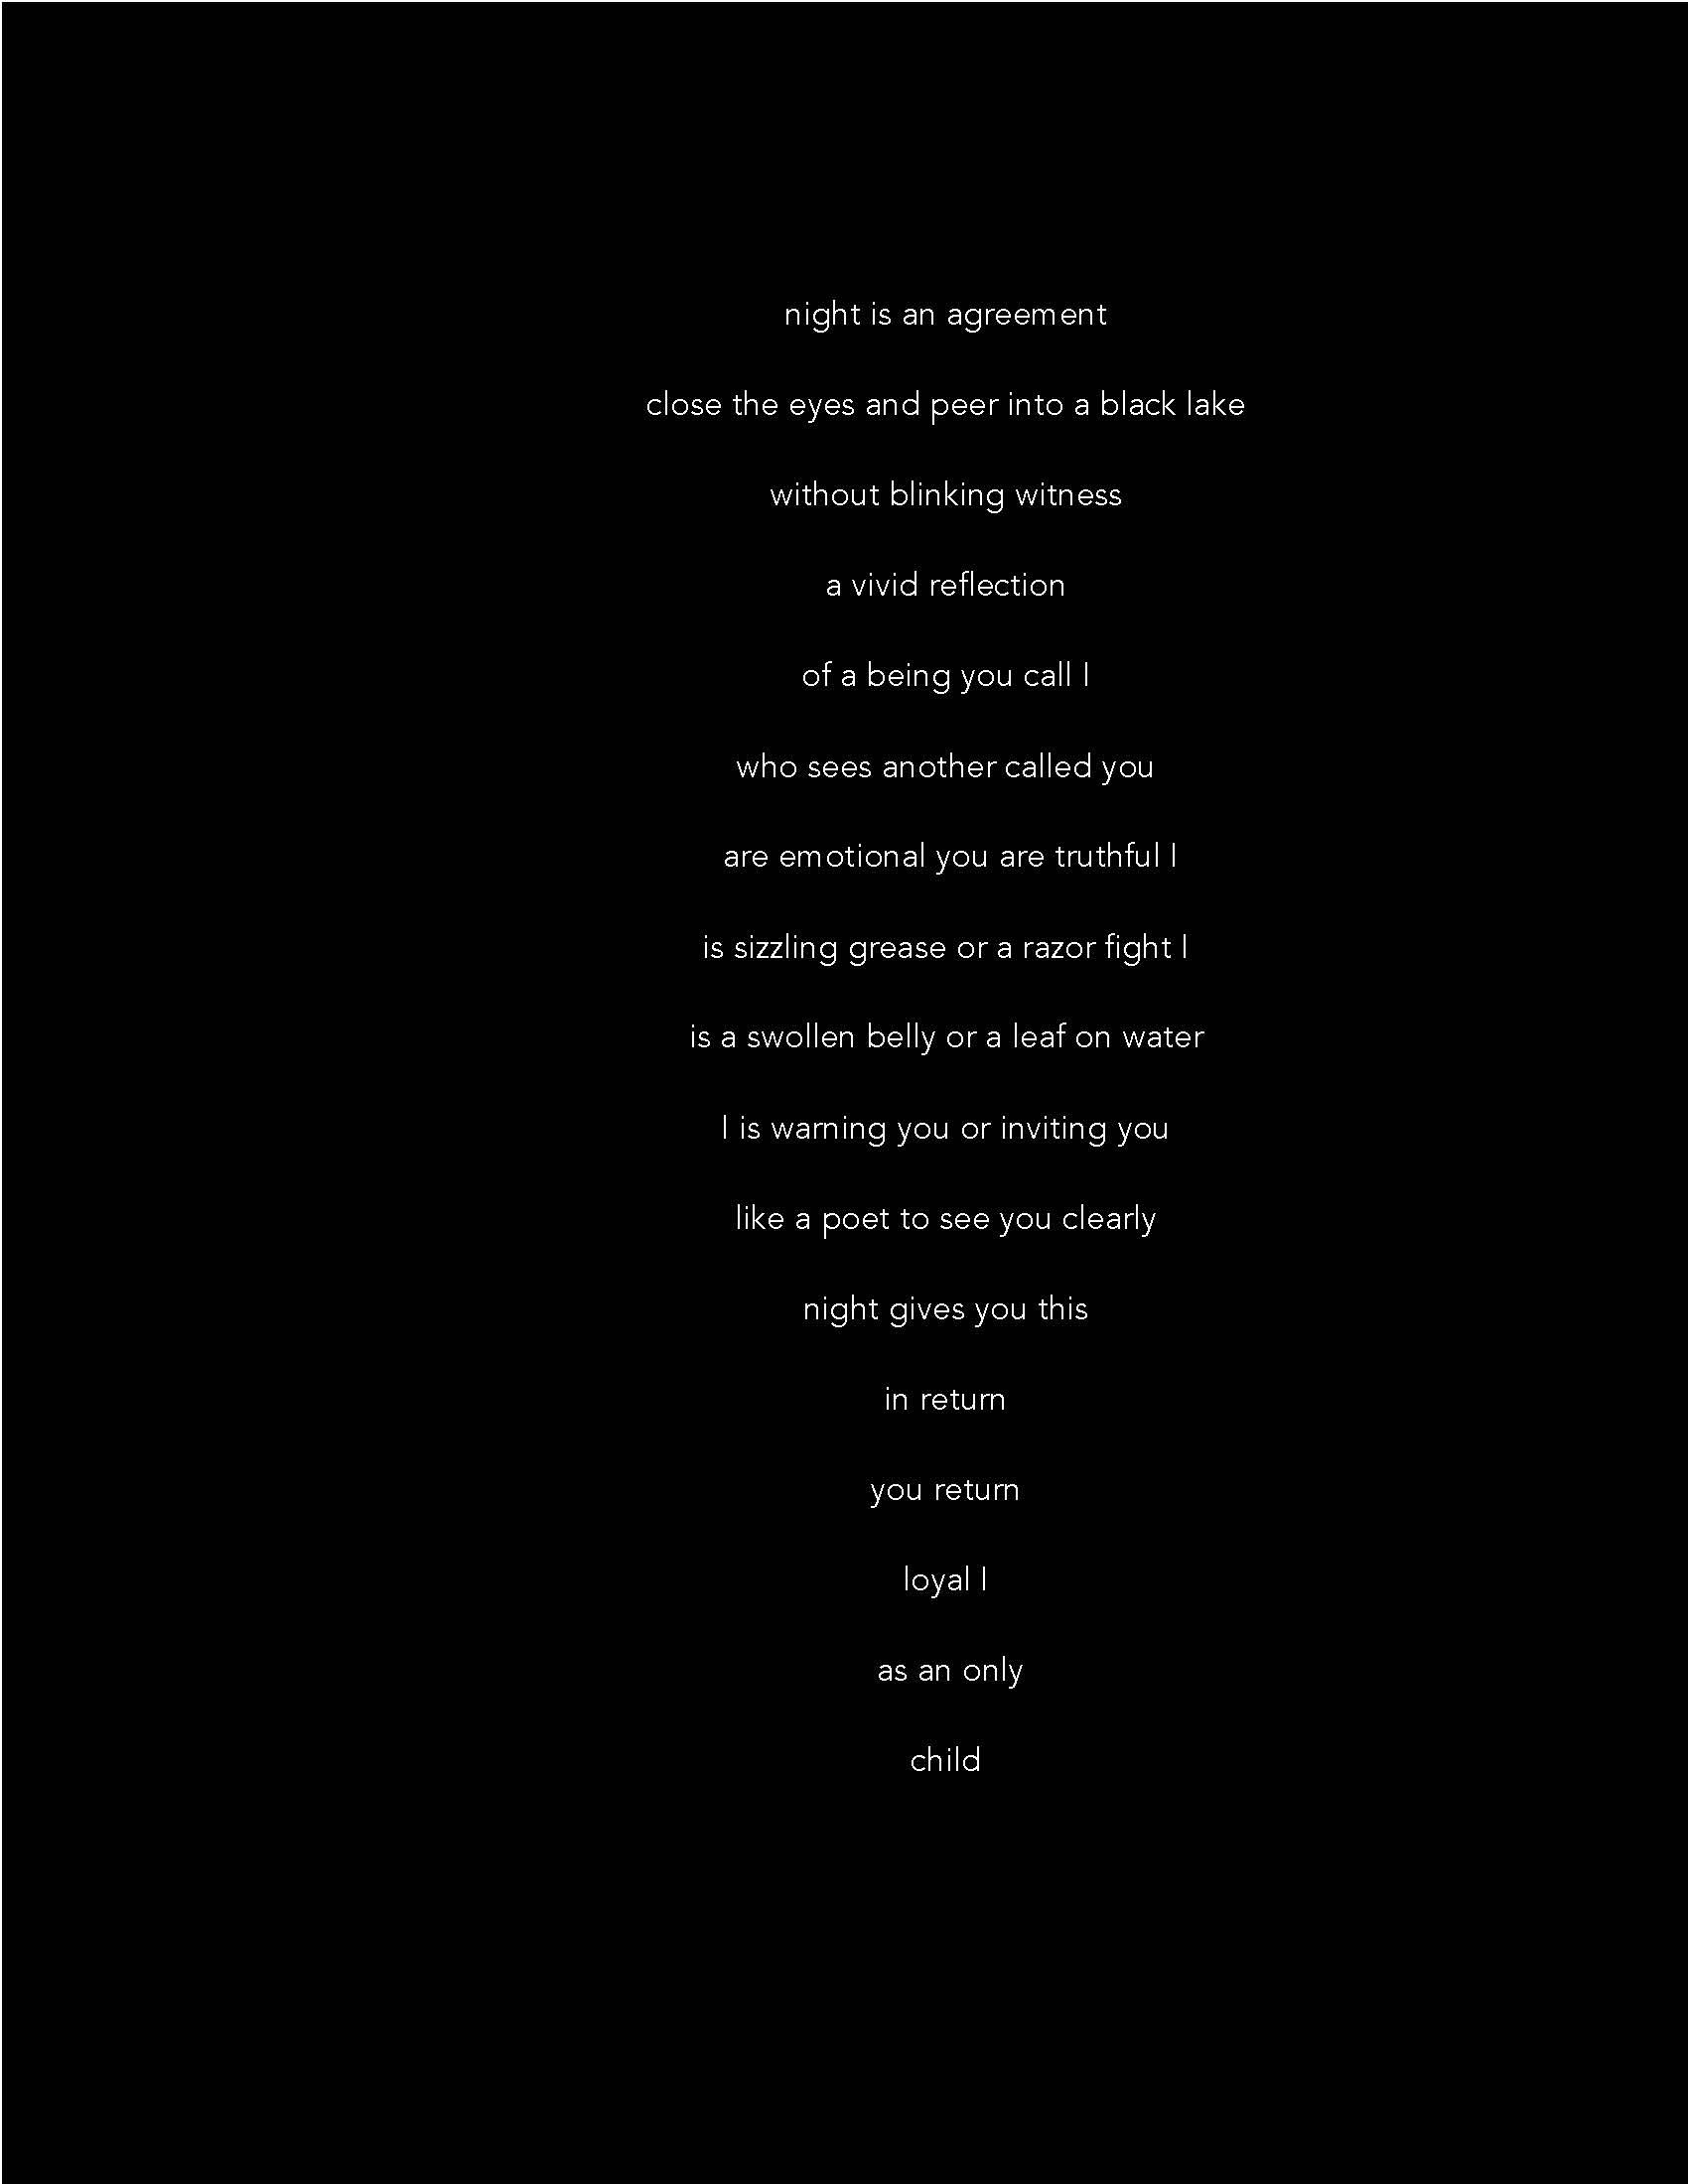 a poem of white text on a black background